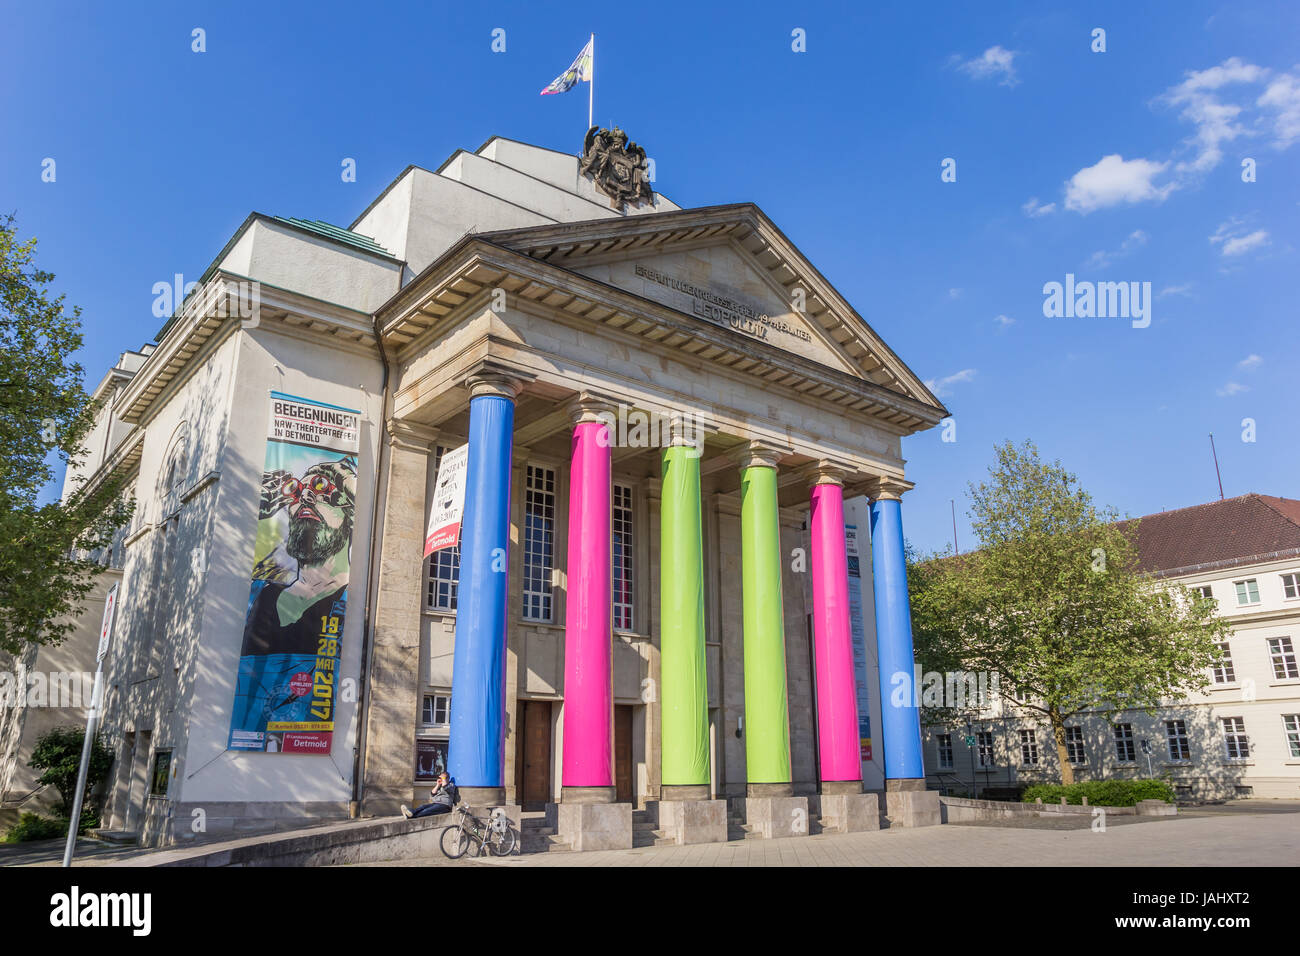 Colorful city steatre in the center of Detmold, Germany Stock Photo